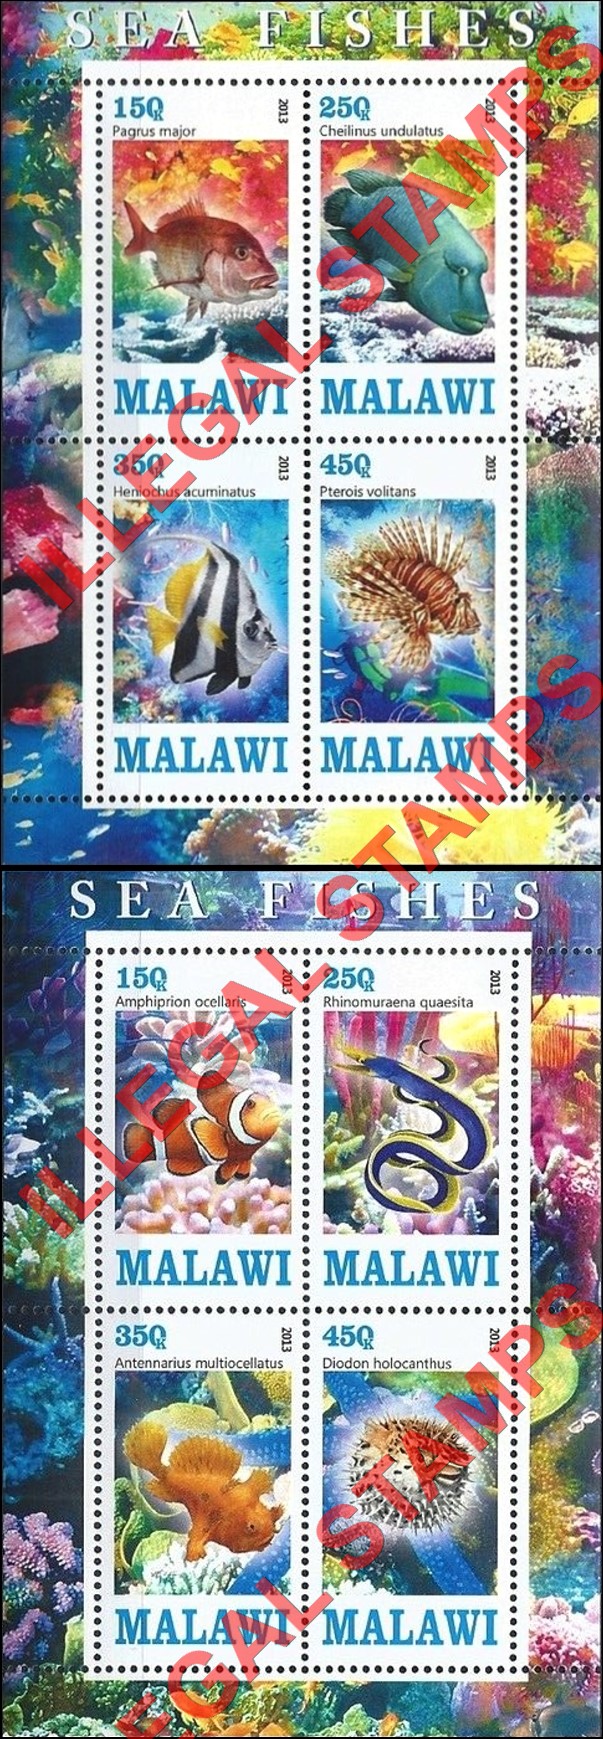 Malawi 2013 Fish Illegal Stamp Souvenir Sheets of 4